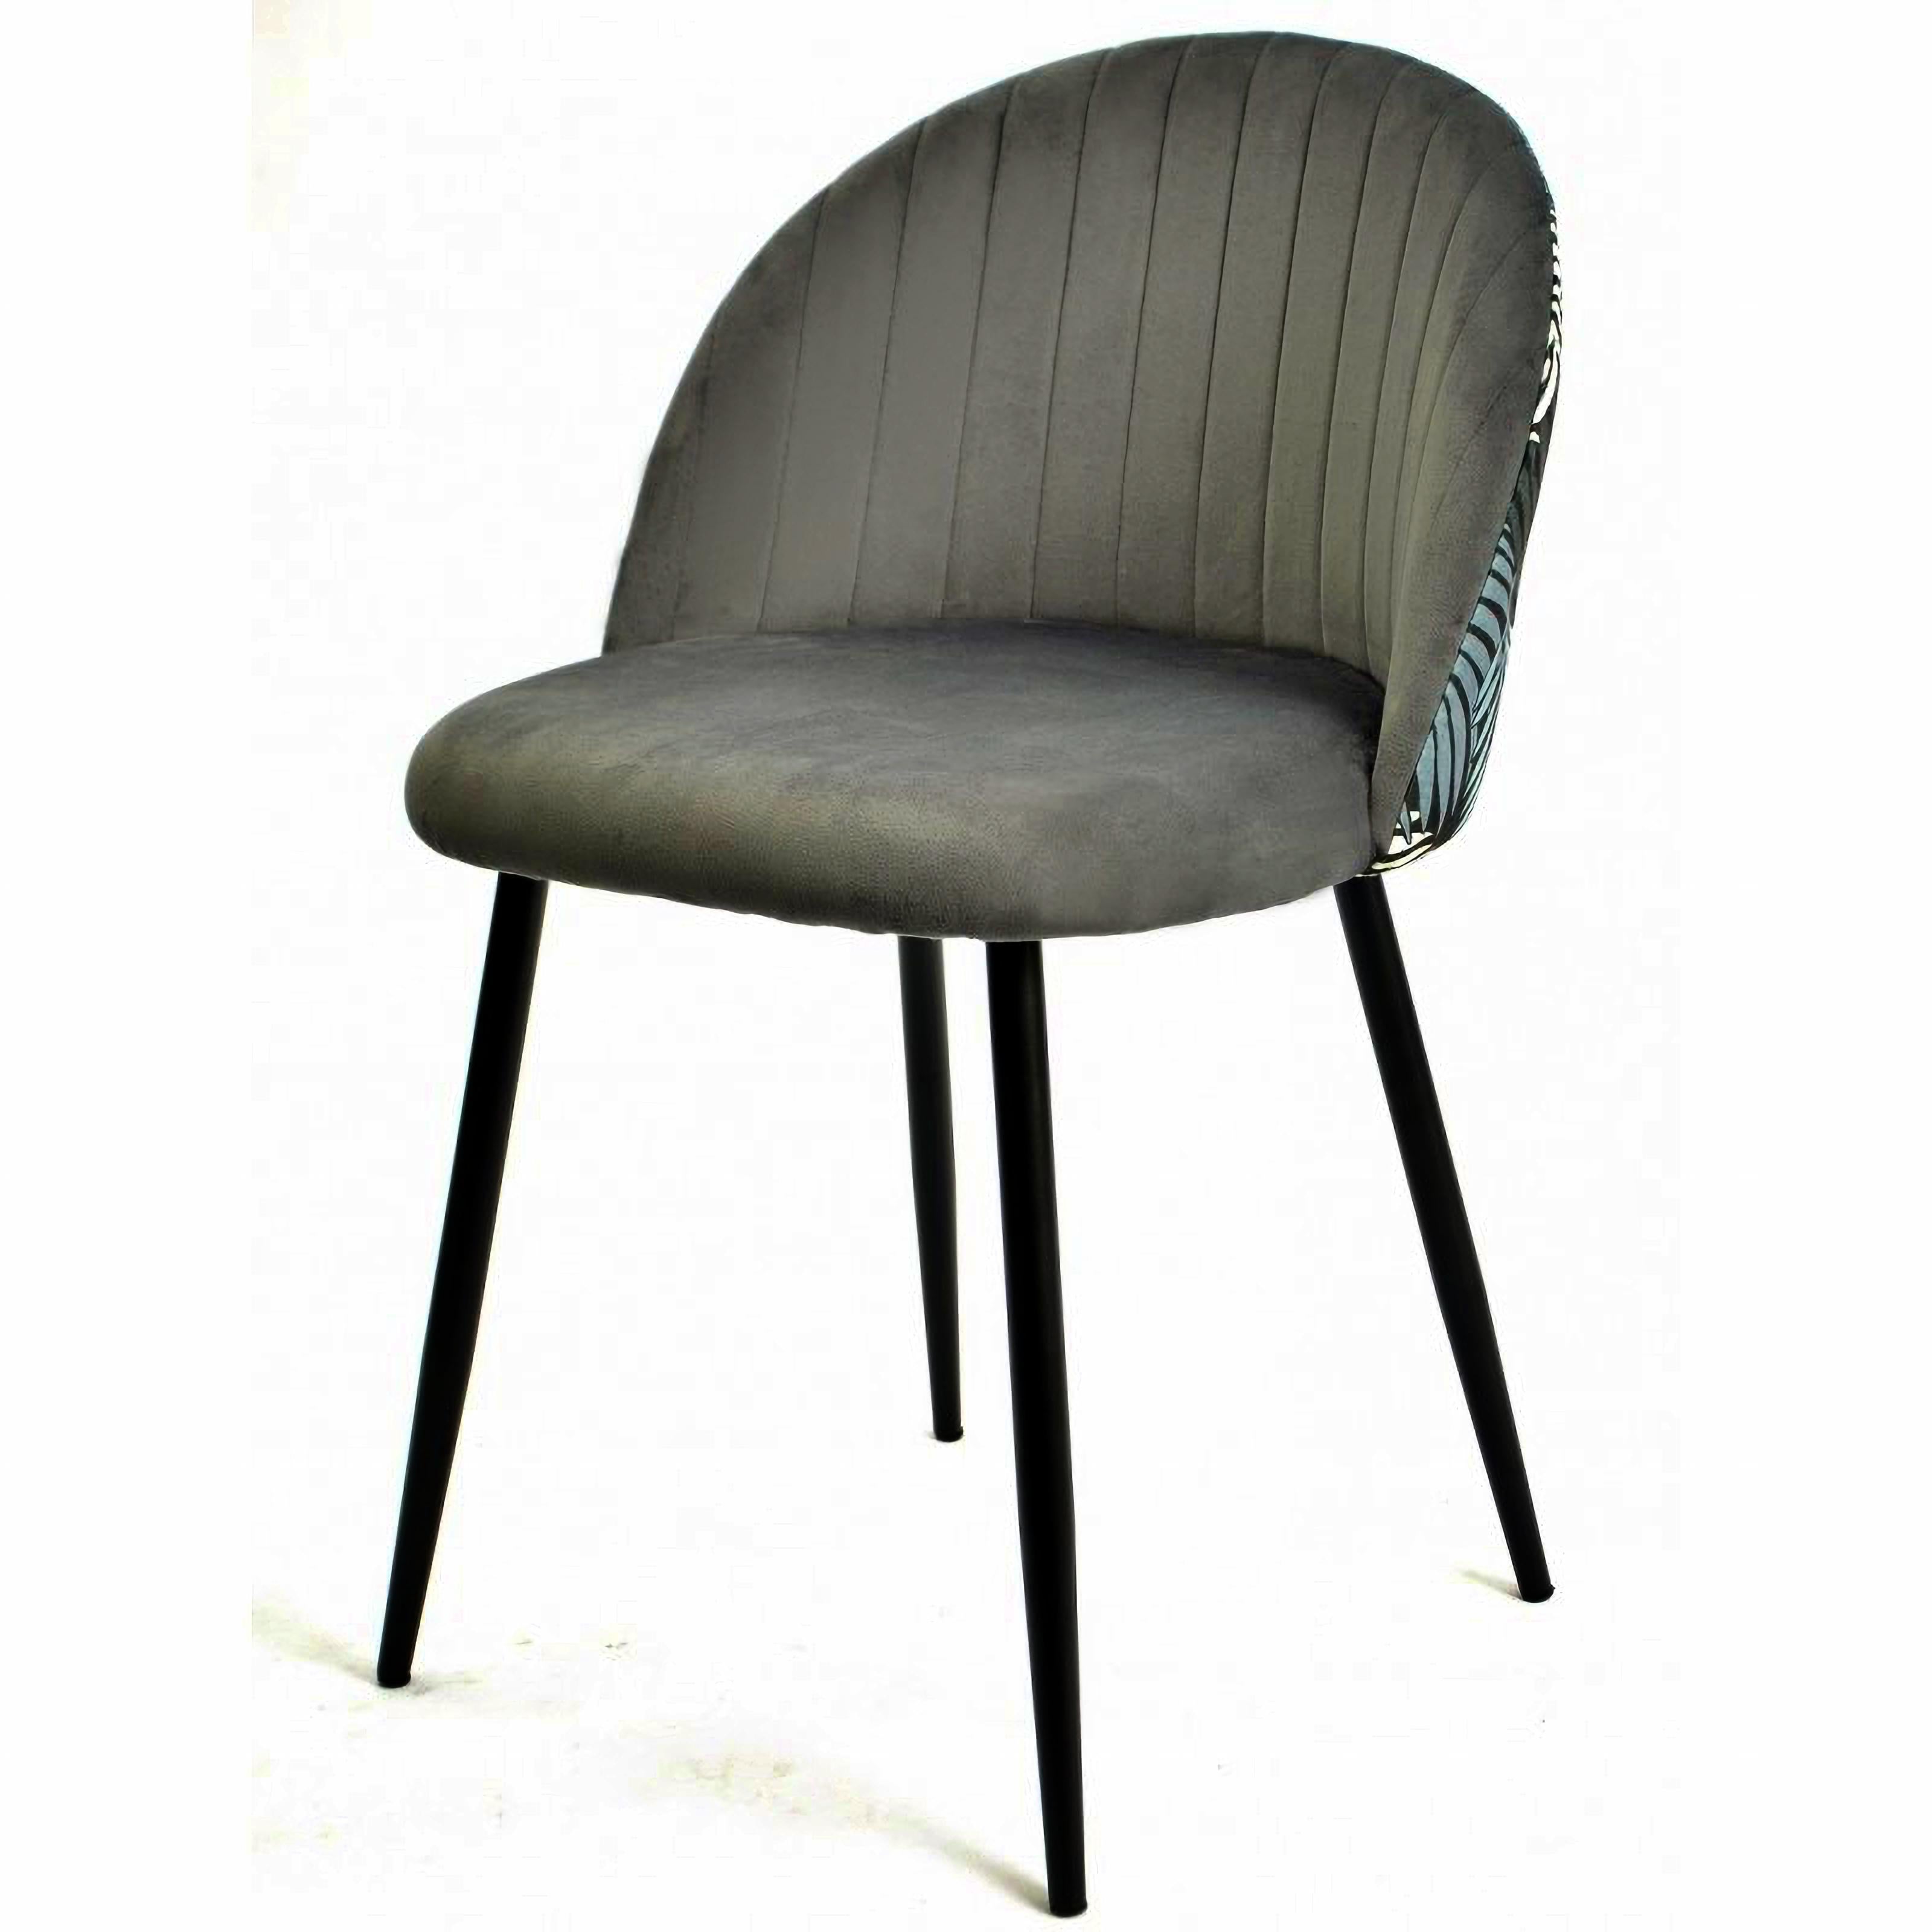 Hand-Crafted New 4 Gray Velvet Upholstered Chairs with Floral Back For Sale